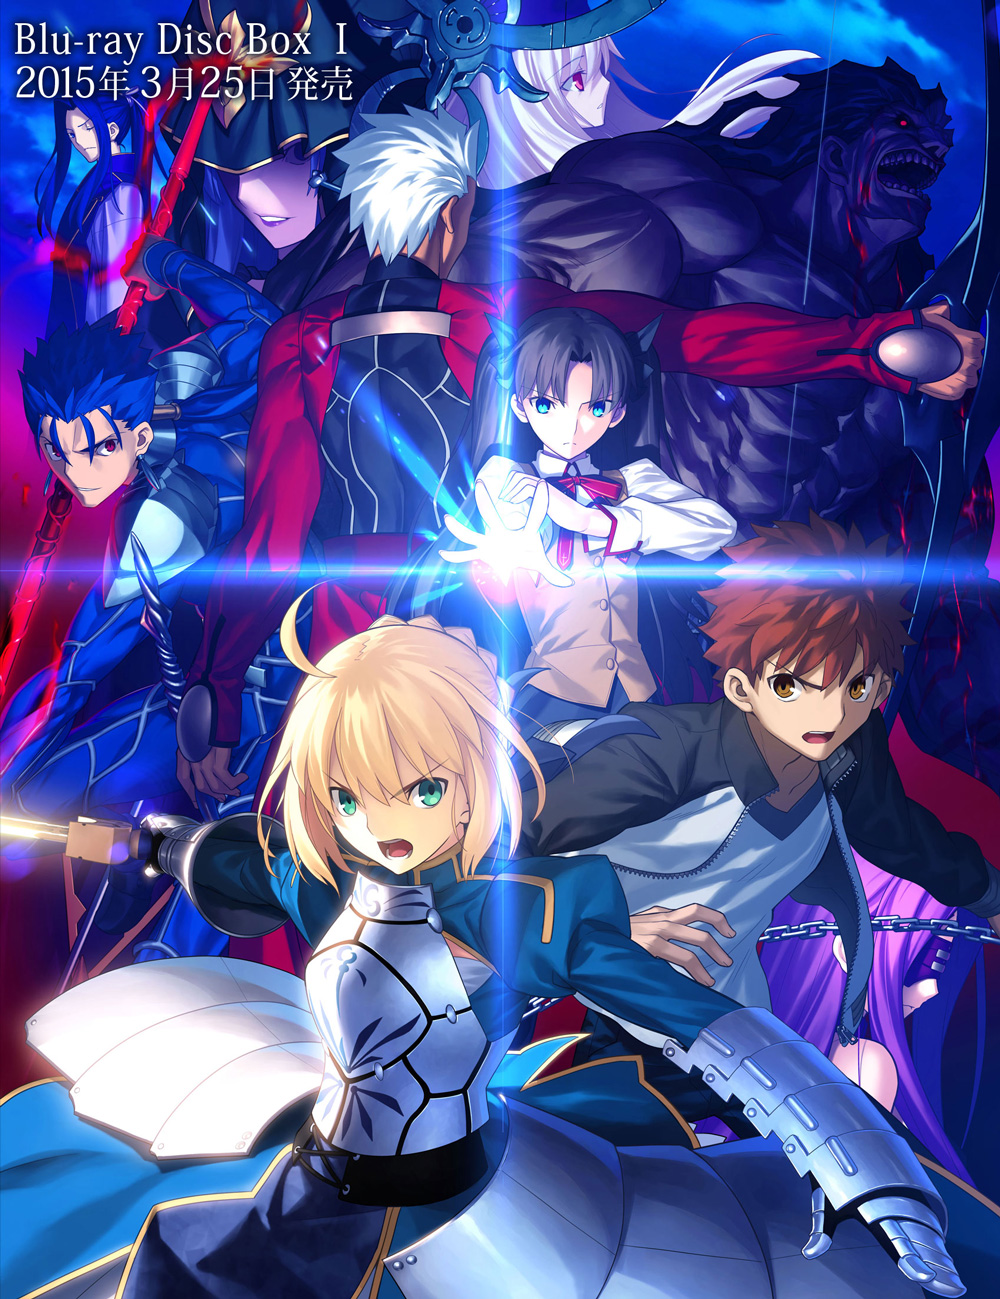 Visual Released For Fate Stay Night Unlimited Blade Works Blu Ray Disc Box 1 Otaku Tale